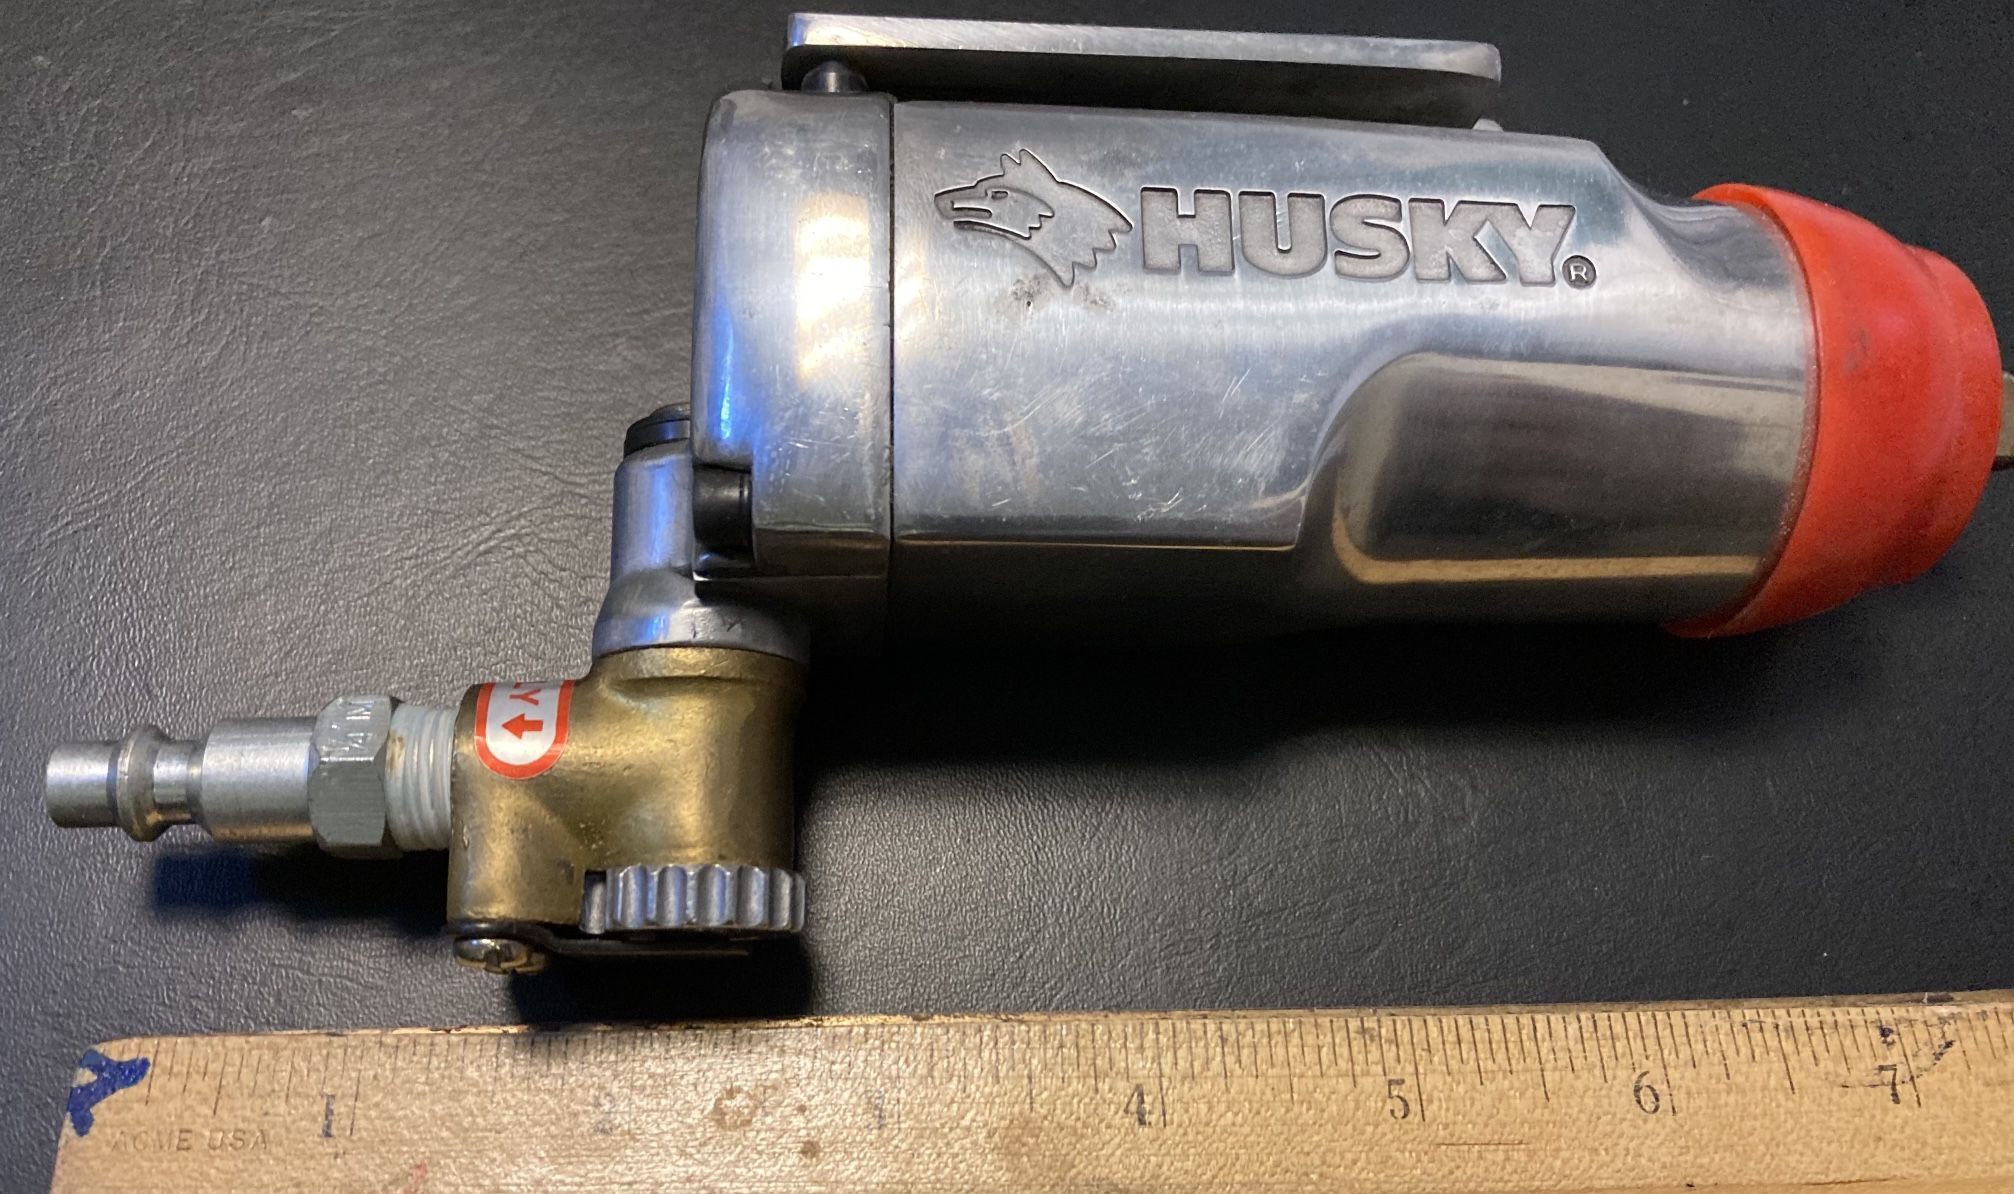 Husky 3/8" Pneumatic Butterfly Impact Wrench H4025 